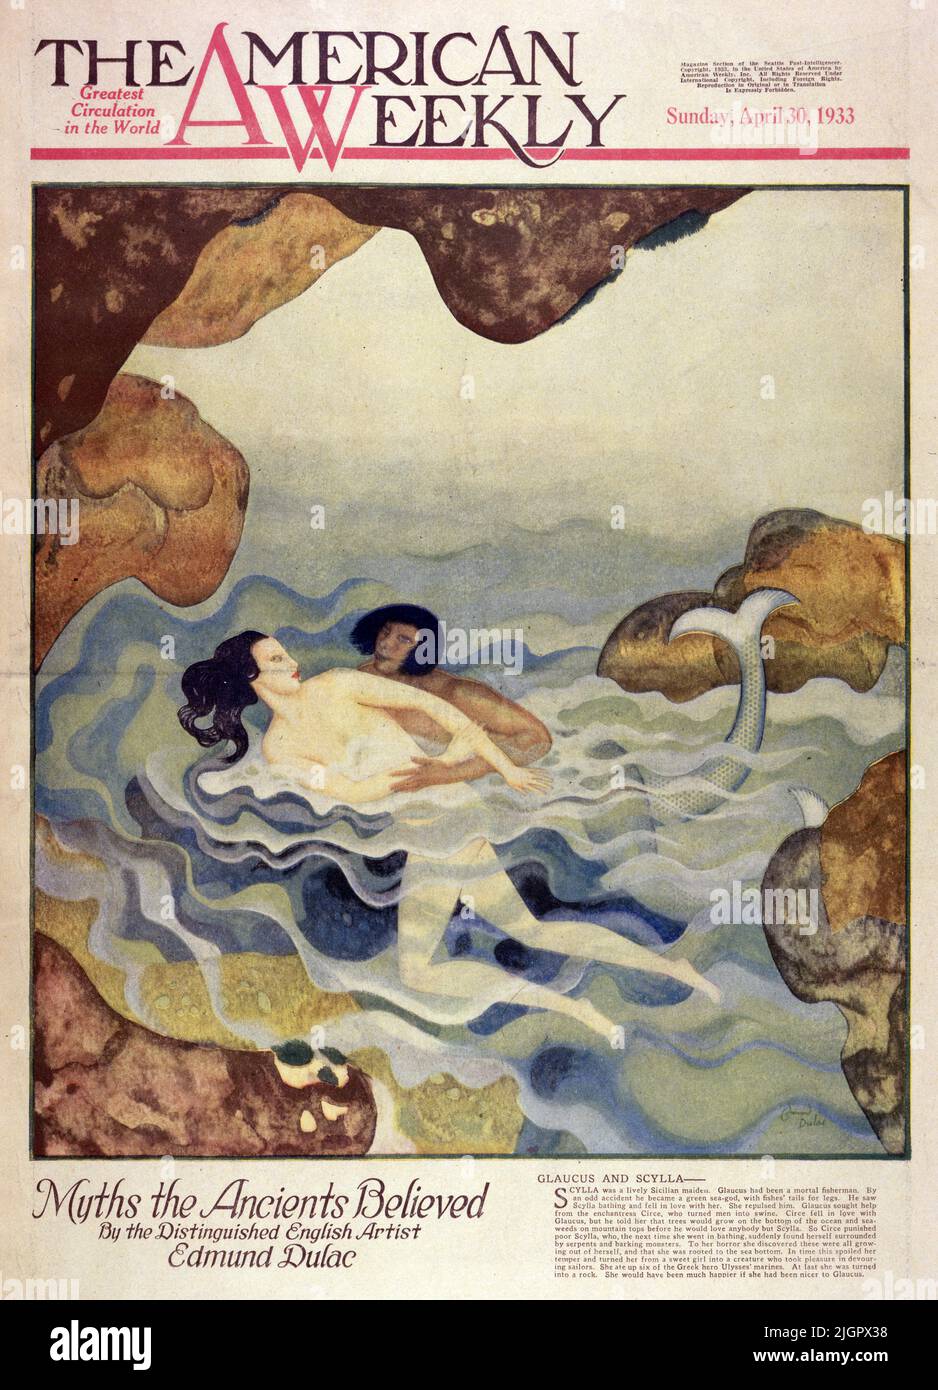 'Glaucus and Scylla' published April 30,1933 in the American Weekly Sunday magazine painted by Edmund Dulac. Scylla was a lovely Sicilian maiden. Glaucus had been a mortal fisherman. By an odd accident he became a green sea god, with fishes’ tails for legs. He saw Scylla bathing and fell in love with her. She repulsed him. Glaucus sought help from the enchantress Circe, who turned men into swine. Circe fell in love with Glaucus, but he told her that trees would grow at the bottom of the ocean and sea weed on mountain tops before he would love anyone but Scylla. Stock Photo